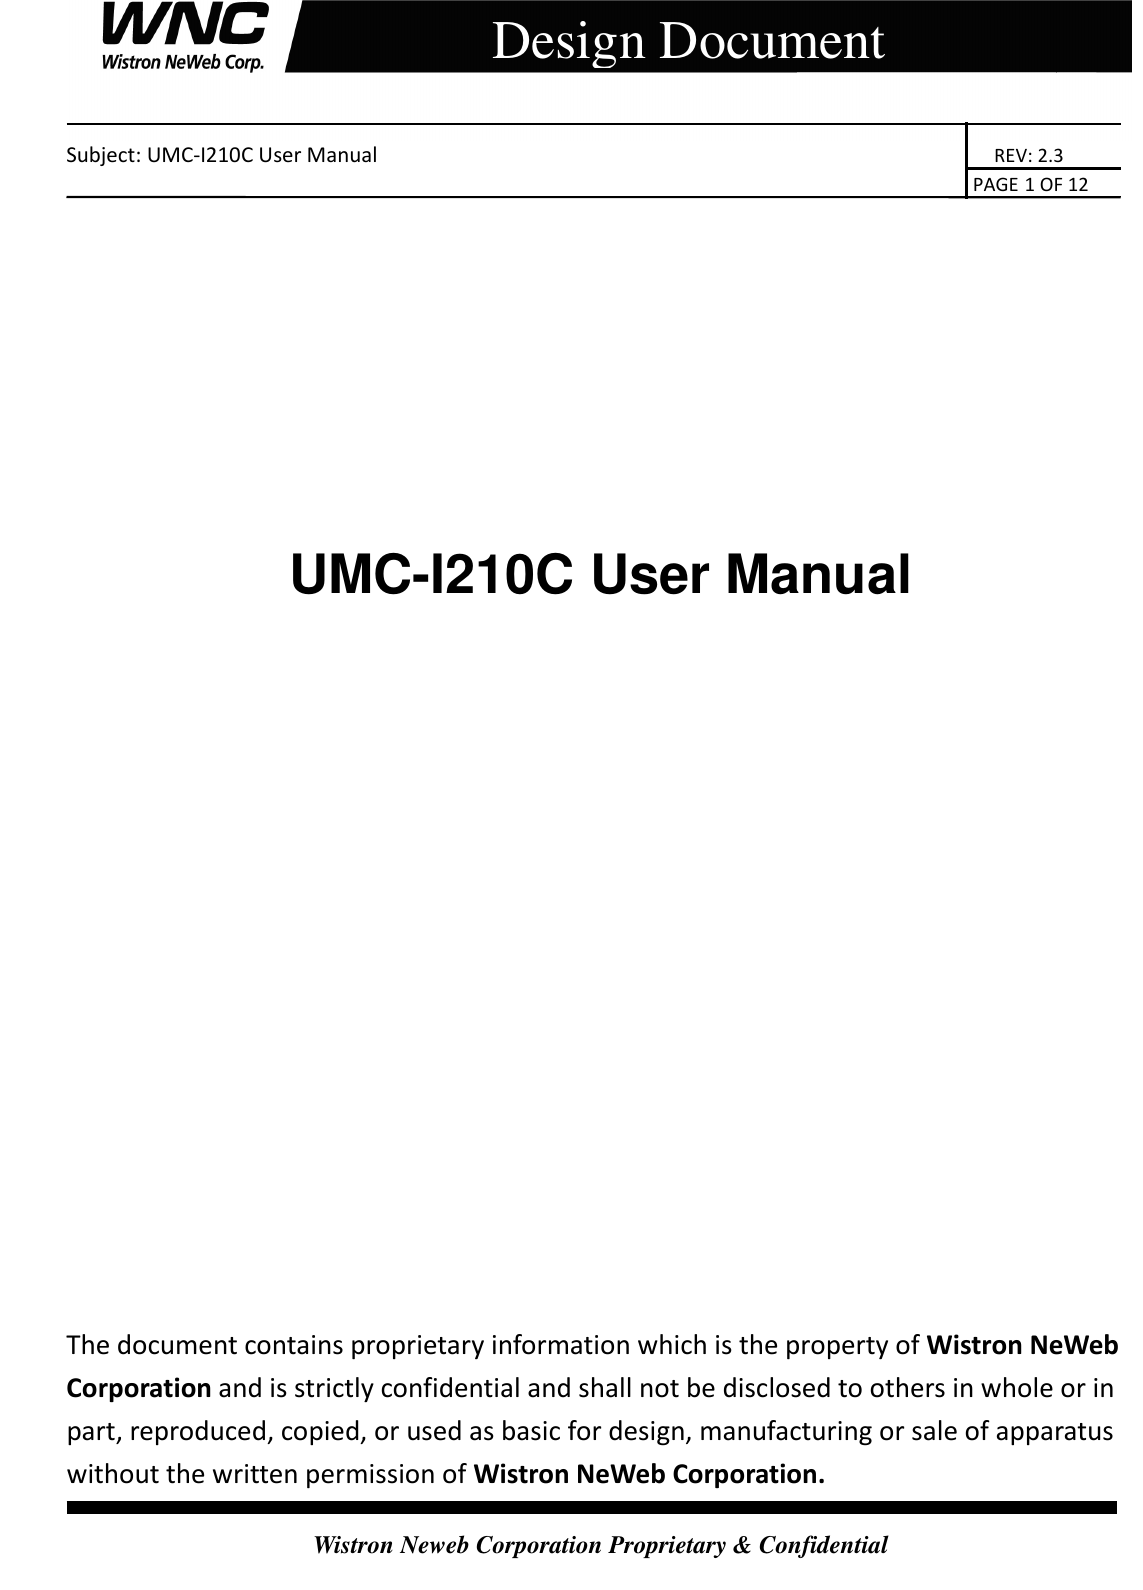    Subject: UMC-I210C User Manual                                                                       REV: 2.3                                                                                                                                                                               PAGE 1 OF 12  Wistron Neweb Corporation Proprietary &amp; Confidential     Design Document          UMC-I210C User Manual                    The document contains proprietary information which is the property of Wistron NeWeb Corporation and is strictly confidential and shall not be disclosed to others in whole or in part, reproduced, copied, or used as basic for design, manufacturing or sale of apparatus without the written permission of Wistron NeWeb Corporation. 